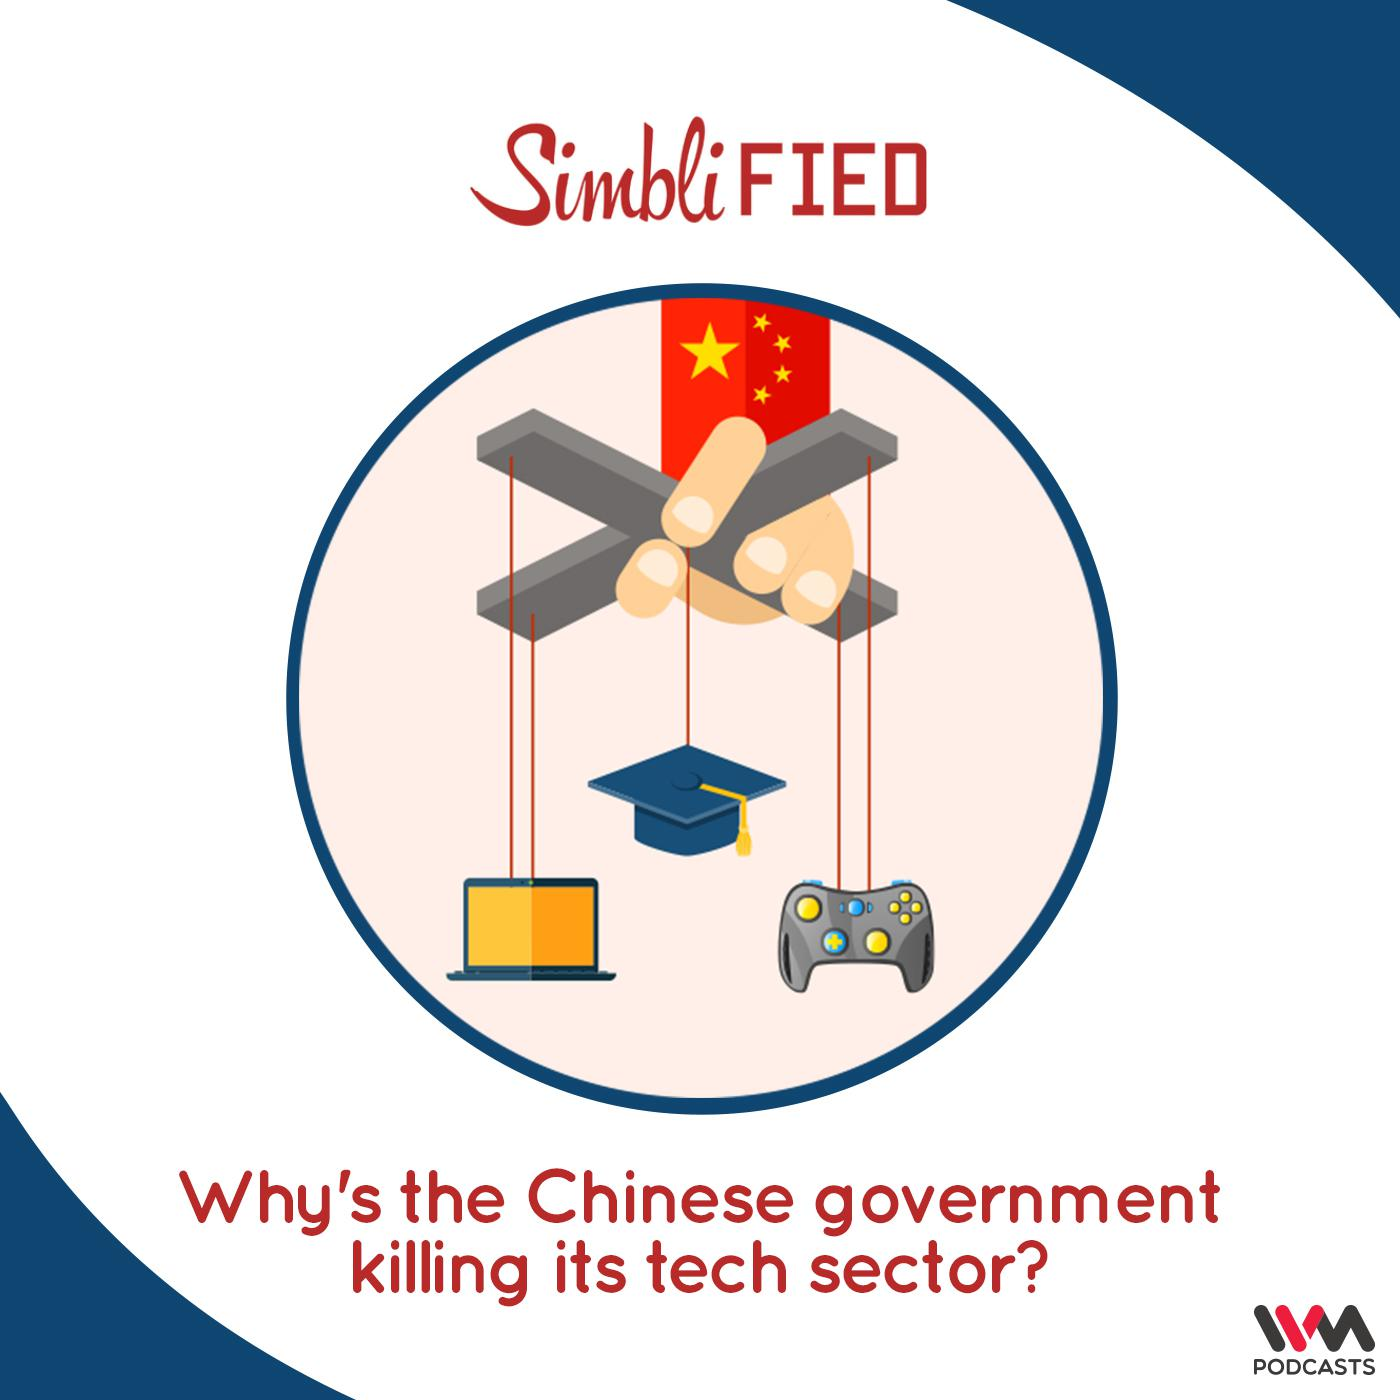 Why's the Chinese government killing its tech sector?